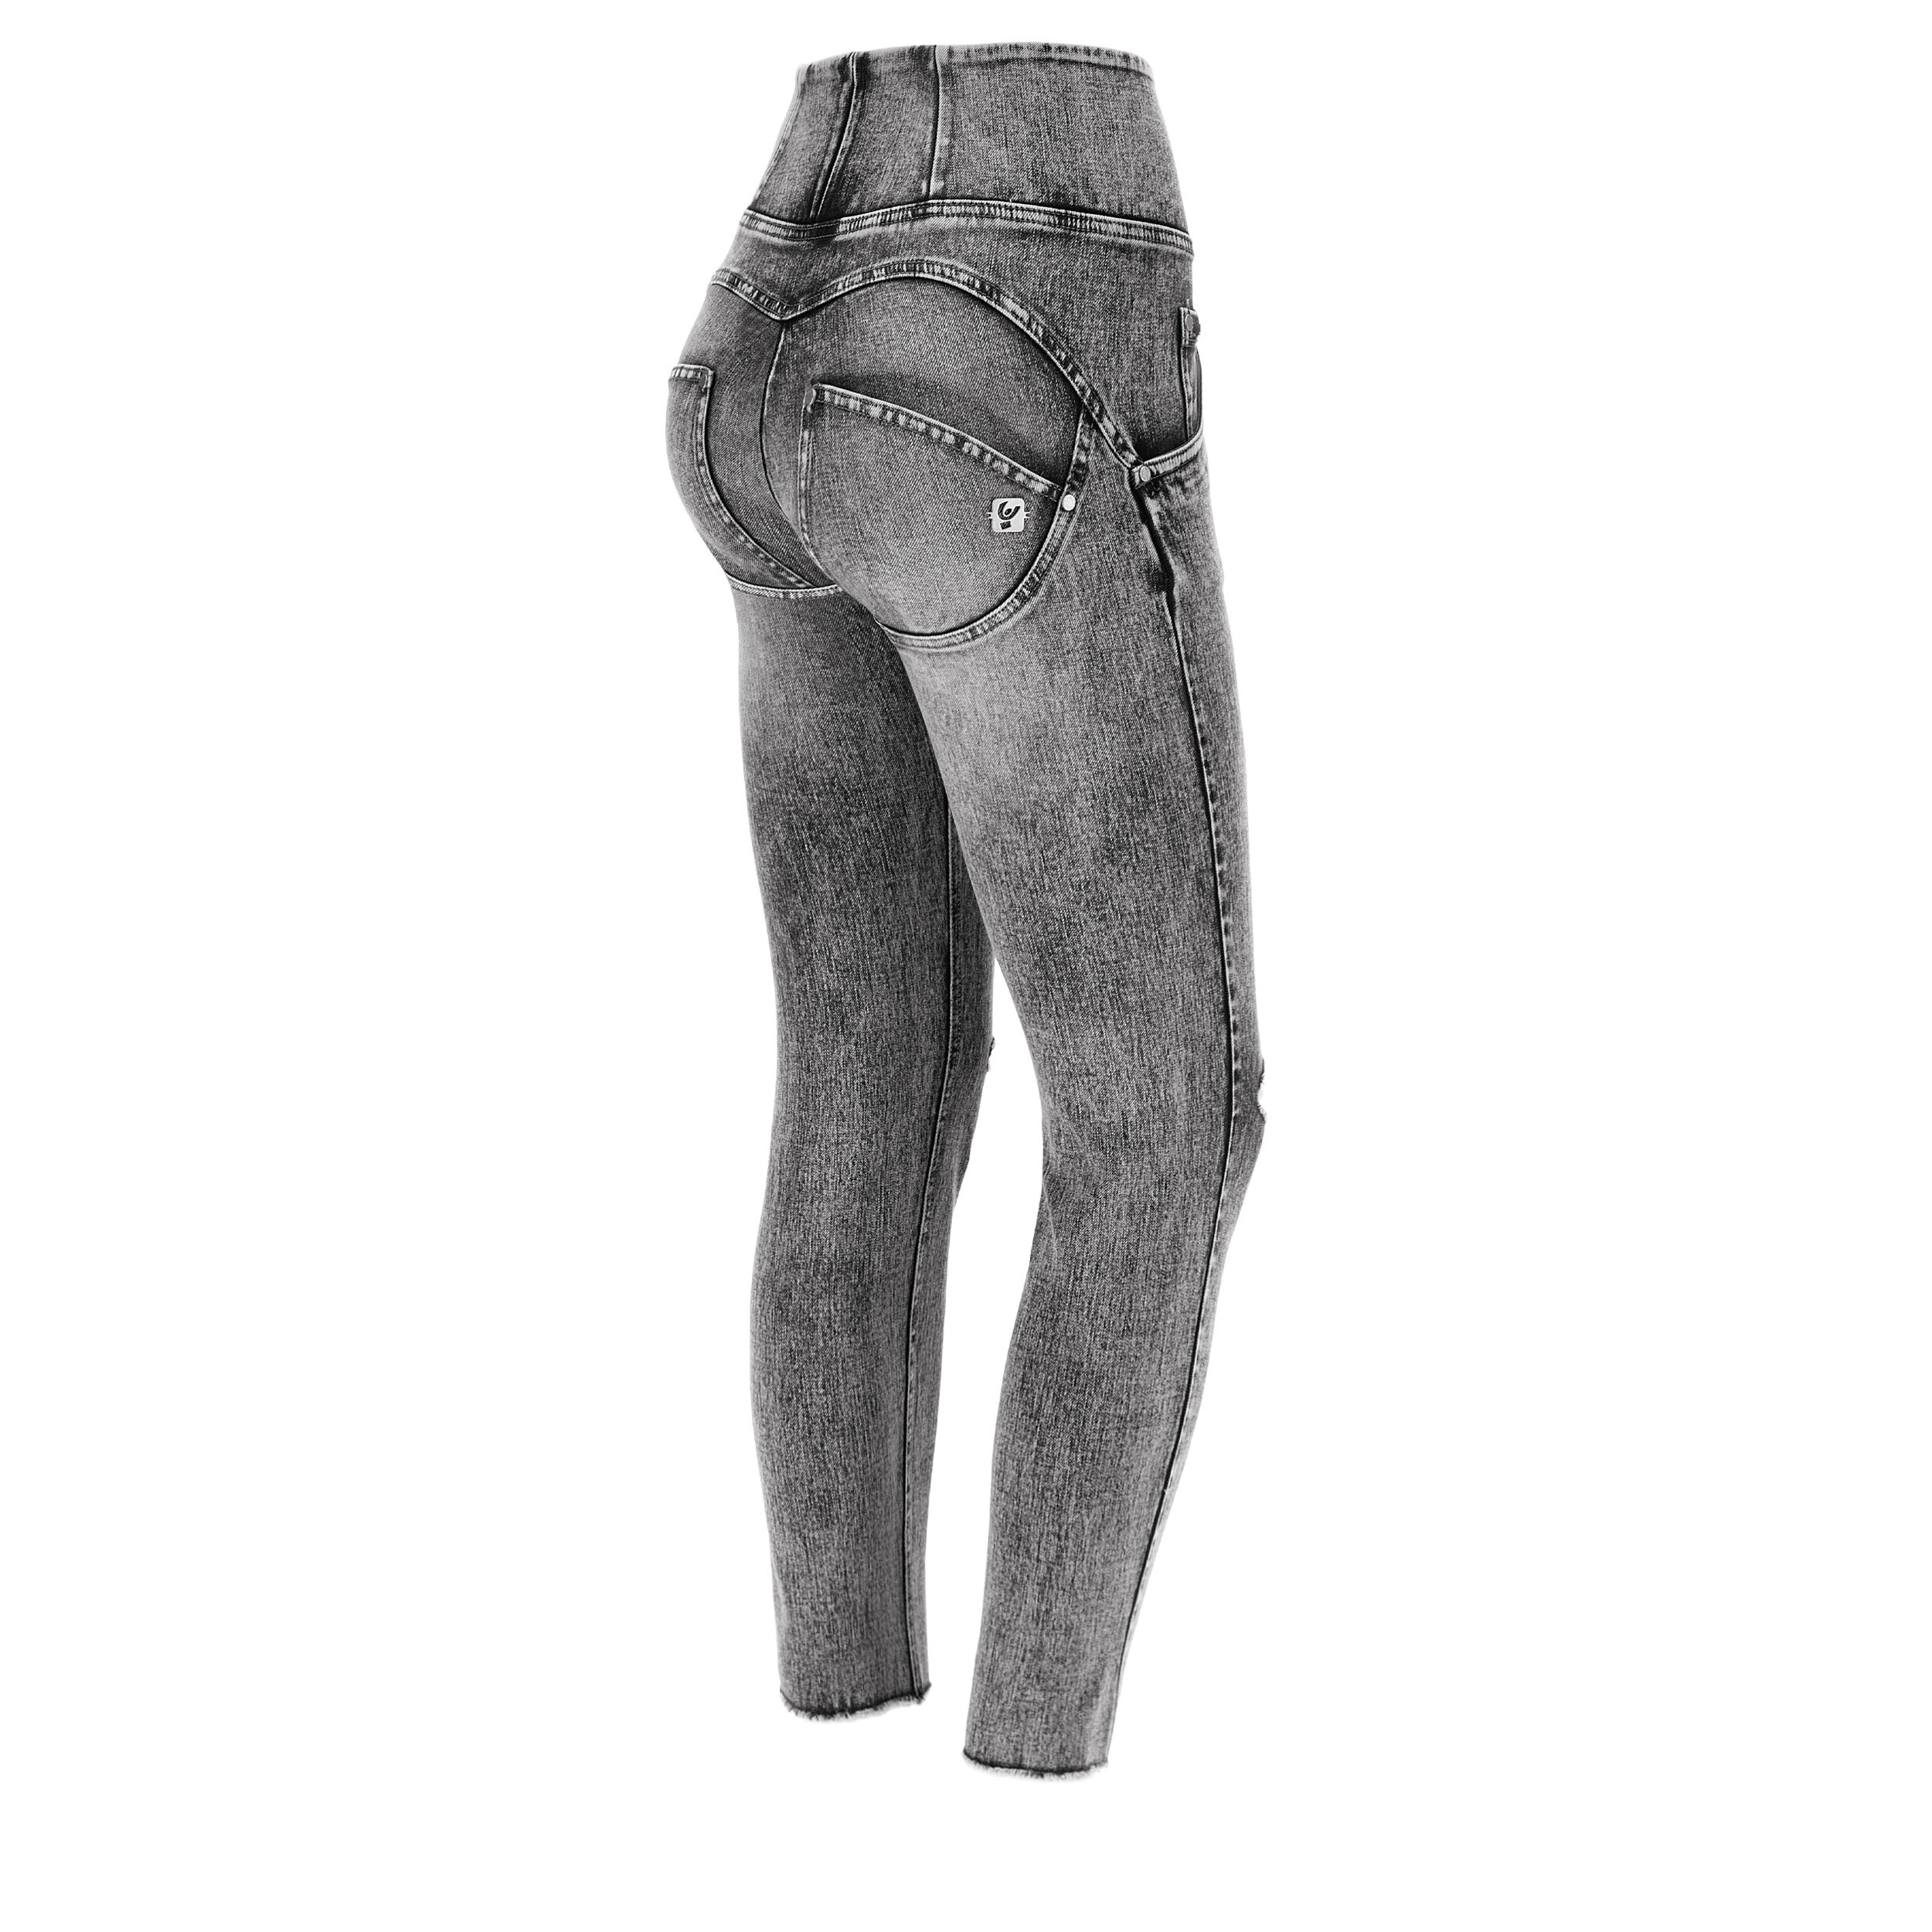 Freddy Jeans push up WR.UP® 7/8 superskinny denim effetto marble wash Jeans Slavato-Cuciture Grigie Donna Xxs